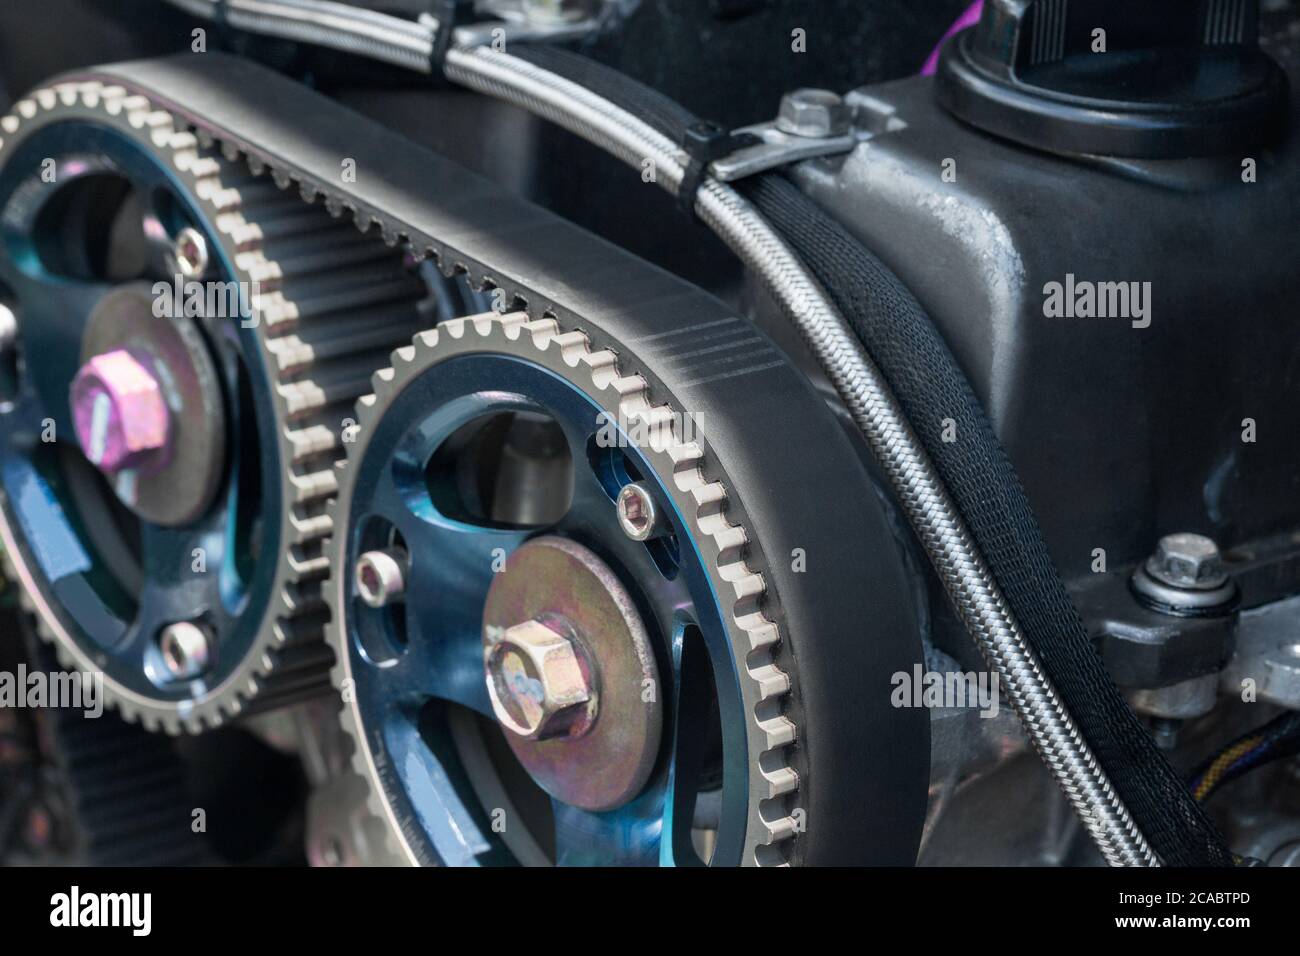 Timing belt and twin camshaft sprocket in engine racing car. Stock Photo